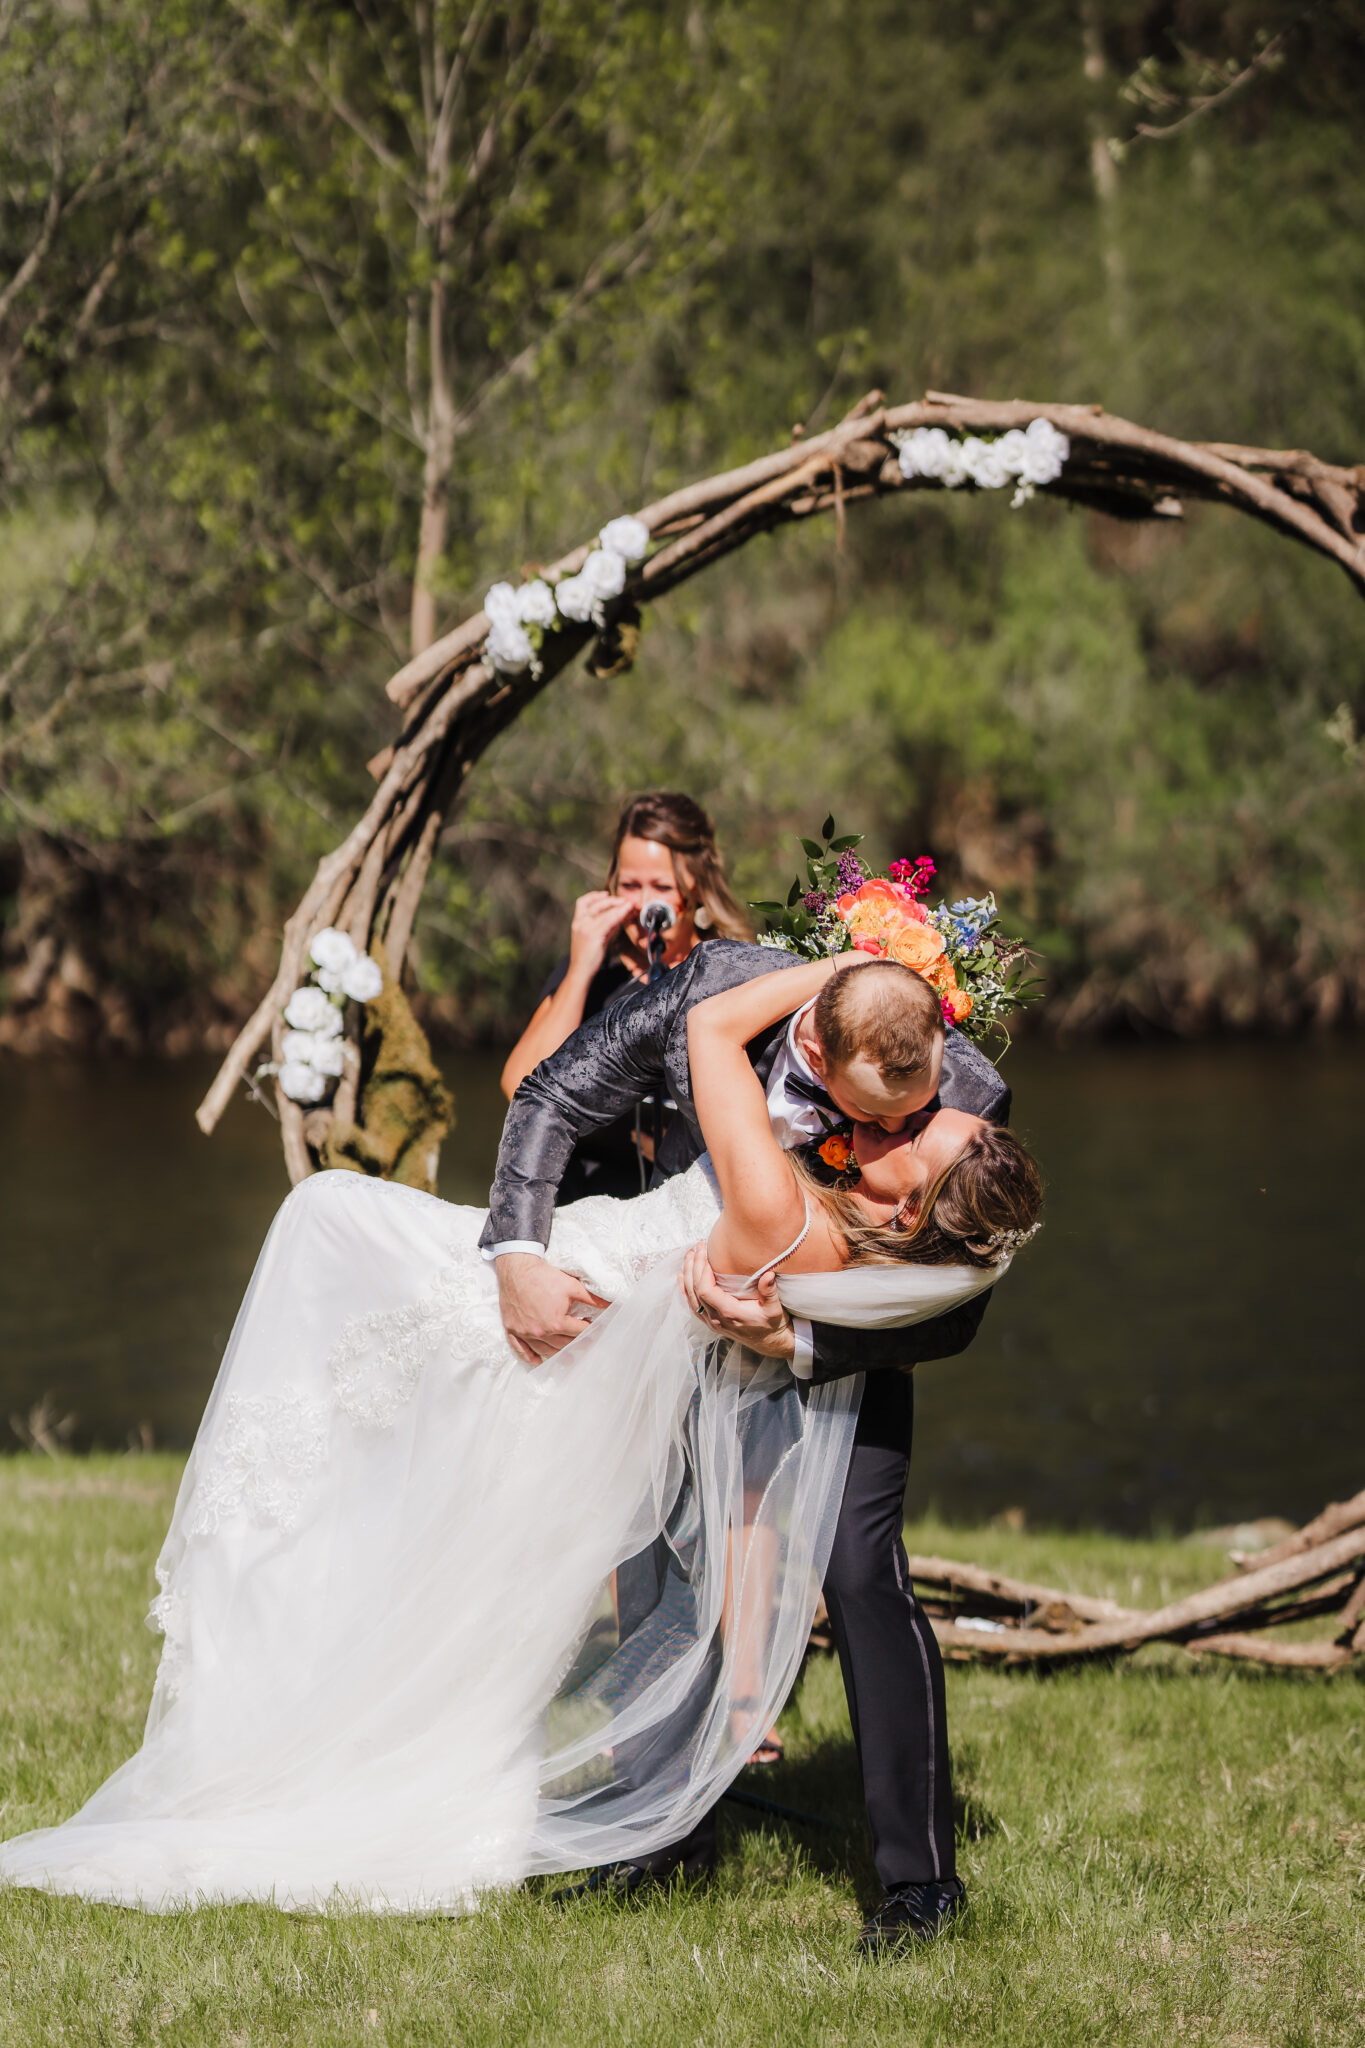 A Wisconsin bride and groom share a kiss in front of a rustic circle arch as the officiant says you may now kiss the bride. Wedding ceremony photos Wedding arch #forestgreenwedding #rusticweddingvenue #weddingplanning #wisconsinweddingphotographer #wisconsinweddingvenue